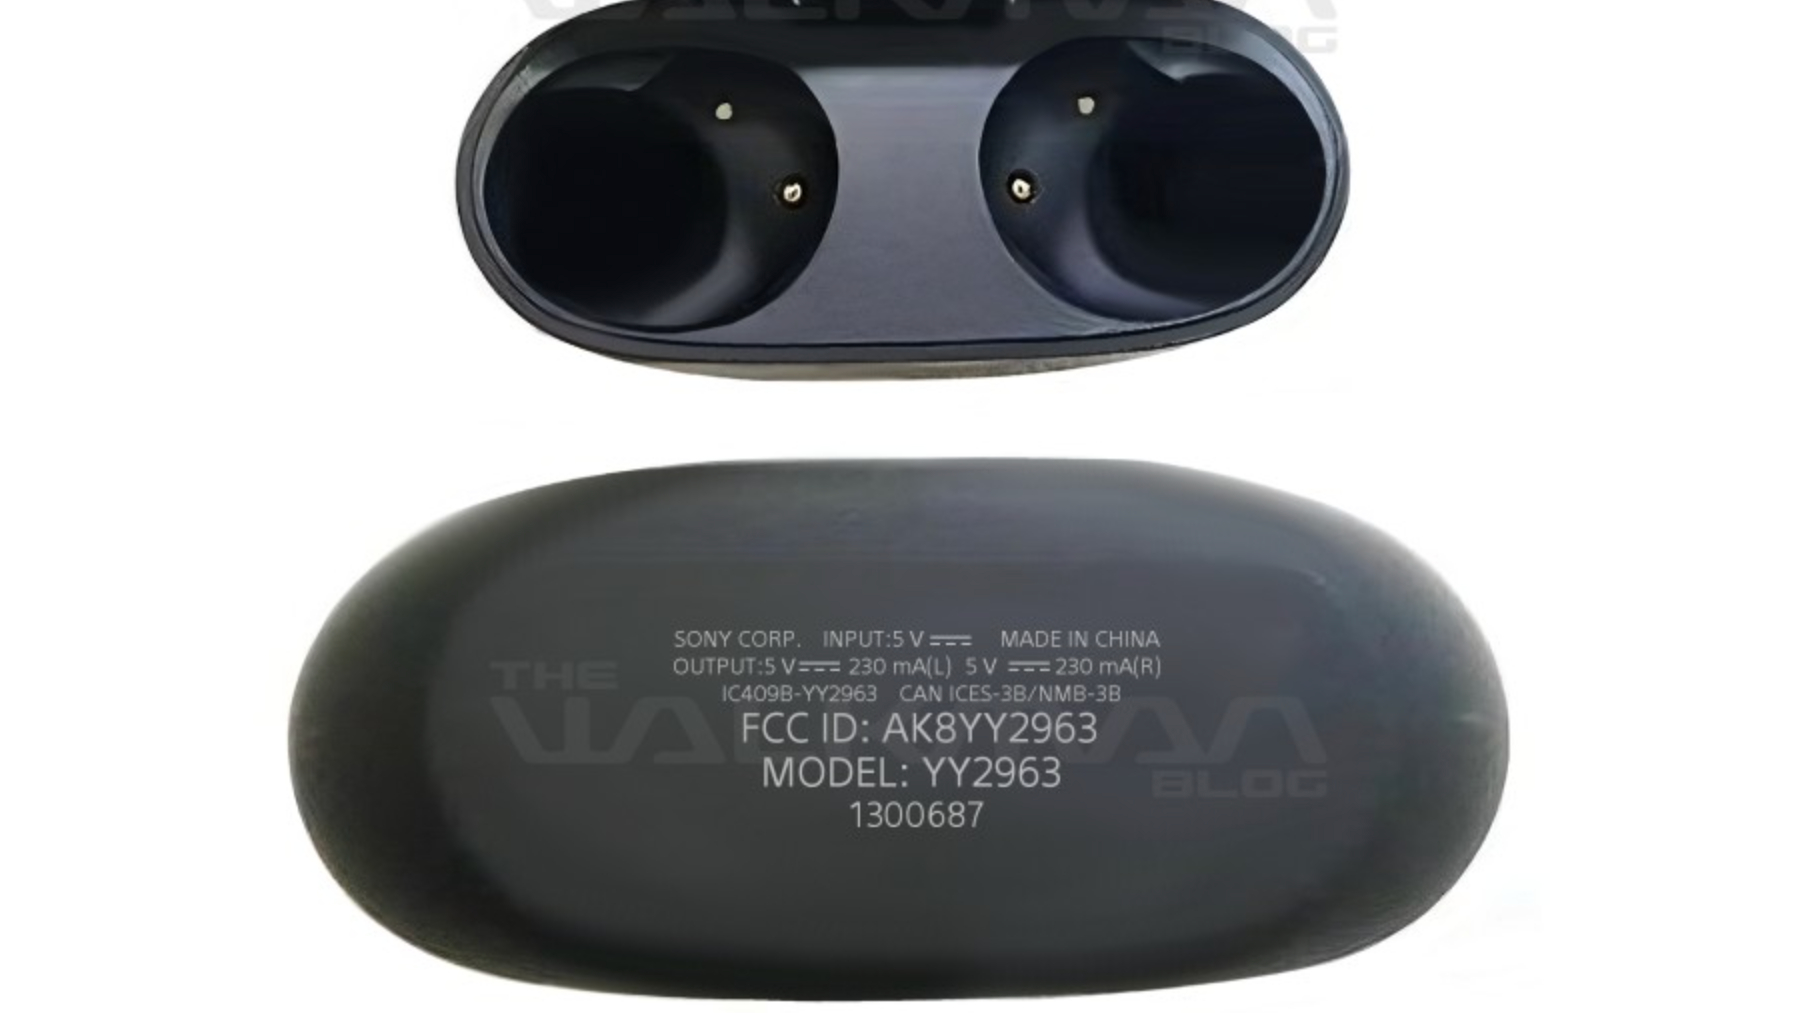 A black earbuds case on white background, also showing the underside of the case